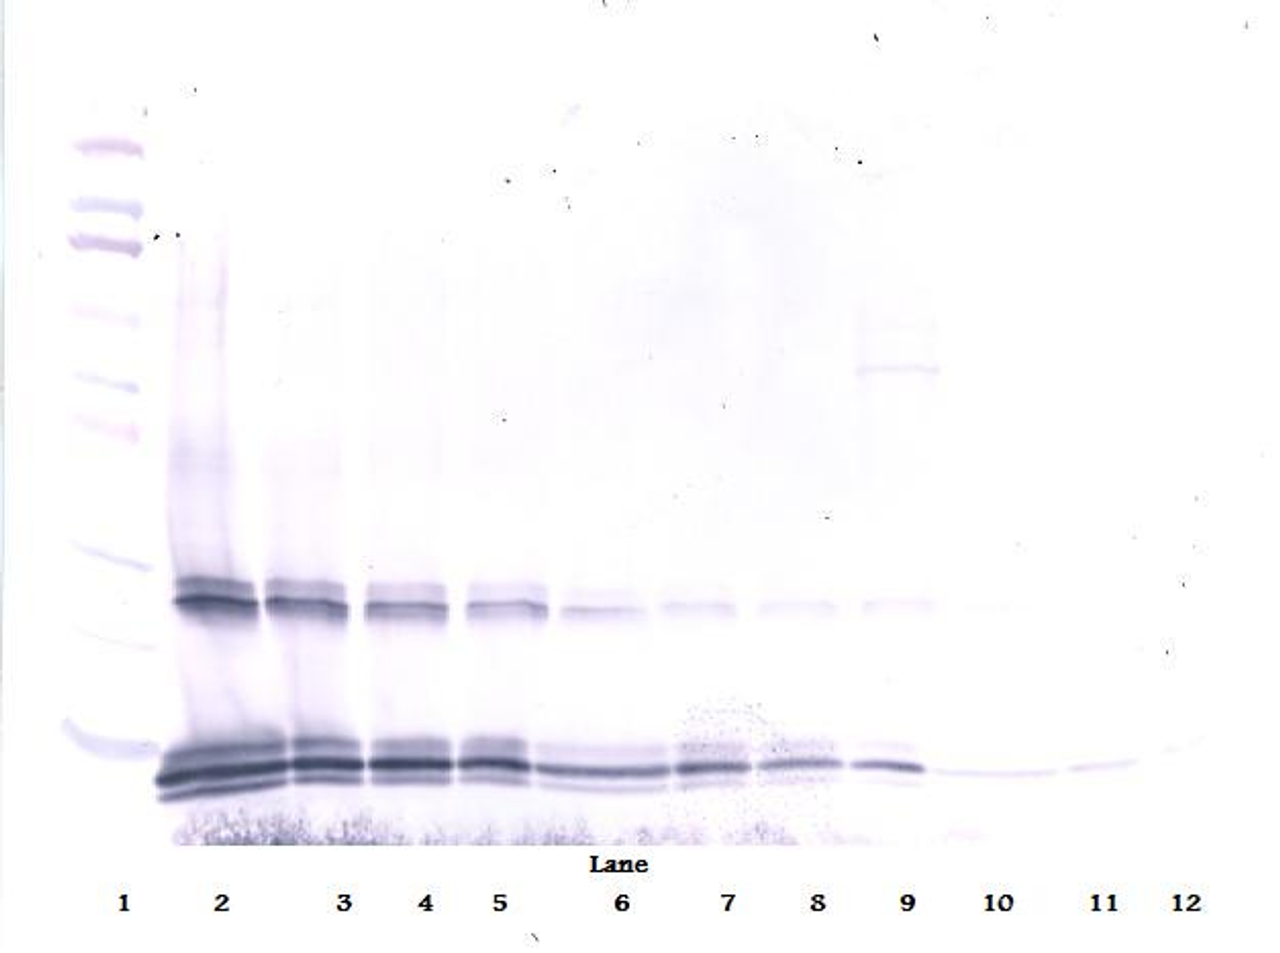 To detect mIL-15 by Western Blot analysis this antibody can be used at a concentration of 0.1 - 0.2 ug/ml. Used in conjunction with compatible secondary reagents the detection limit for recombinant mIL-15 is 1.5 - 3.0 ng/lane, under either reducing or non-reducing conditions.